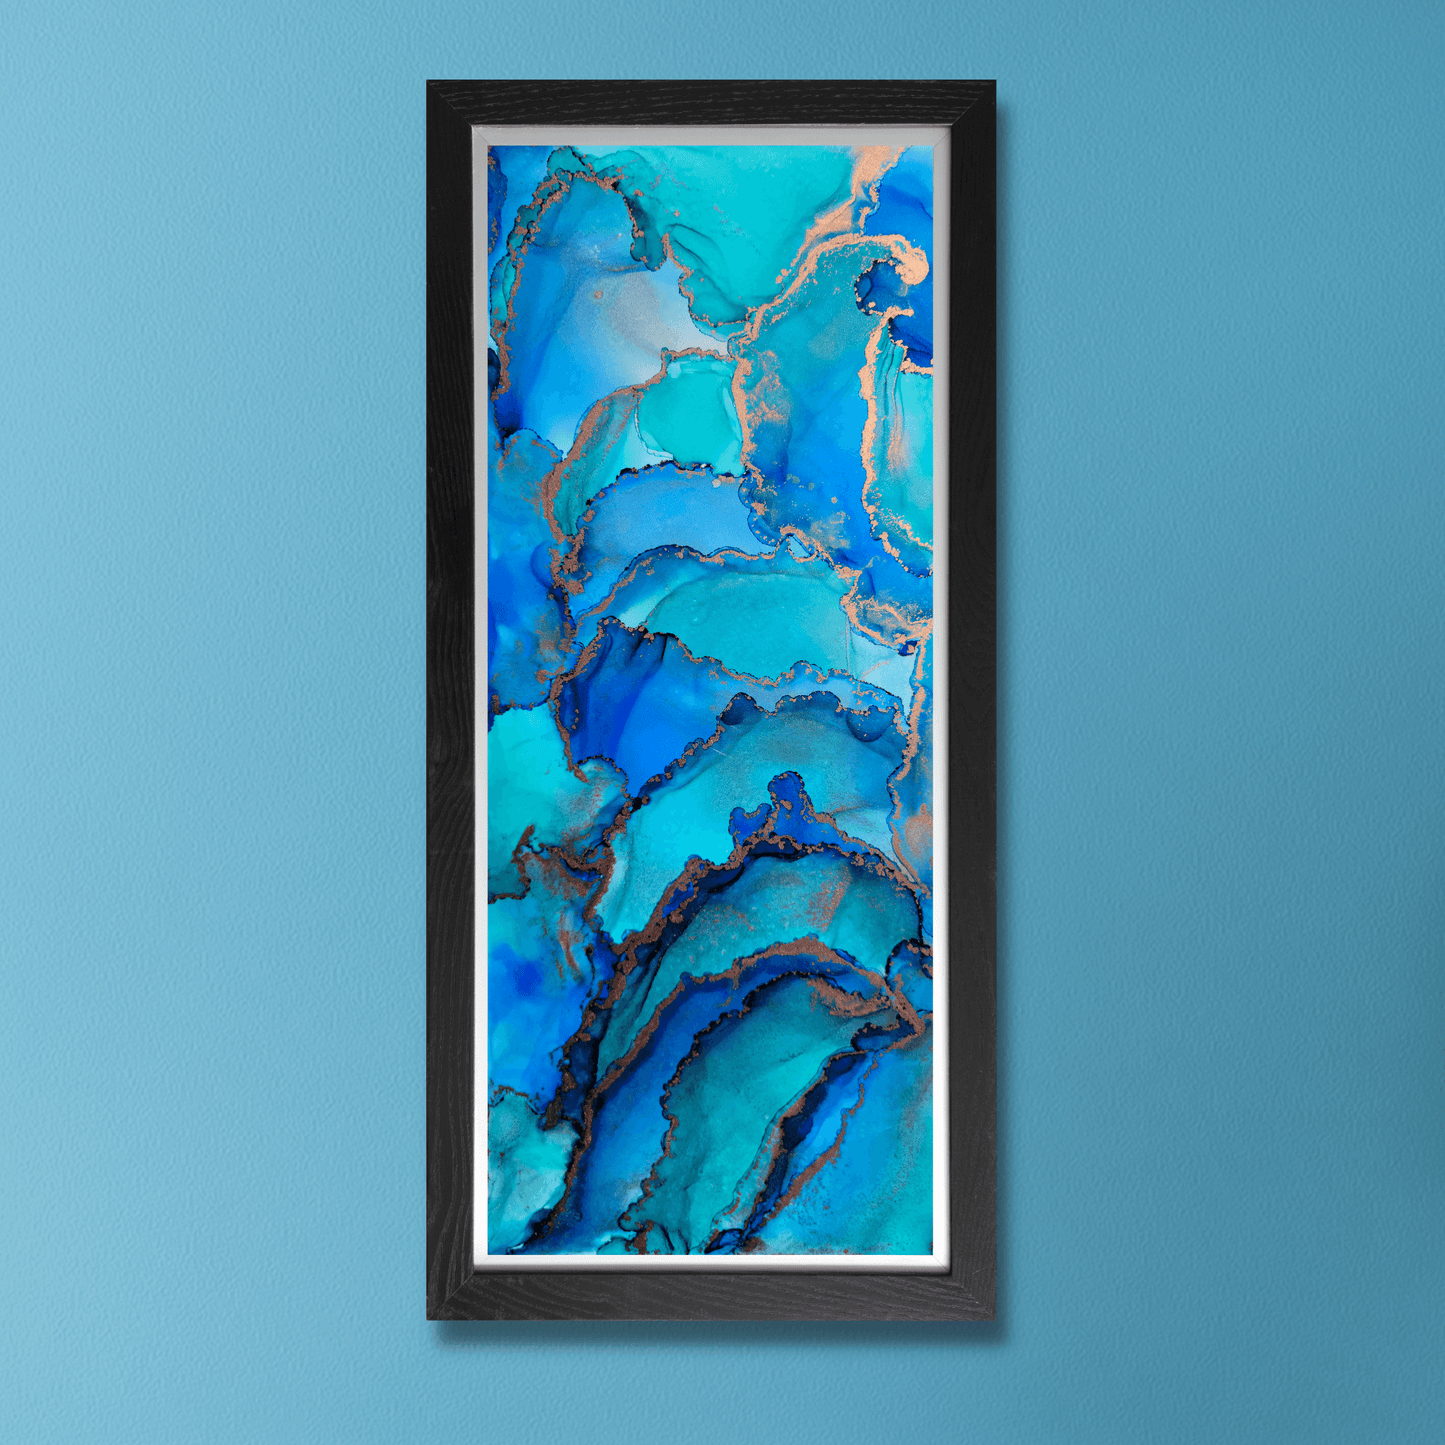 This original alcohol ink artwork features blue and teal alcohol ink with copper alcohol ink accents on white synthetic paper.